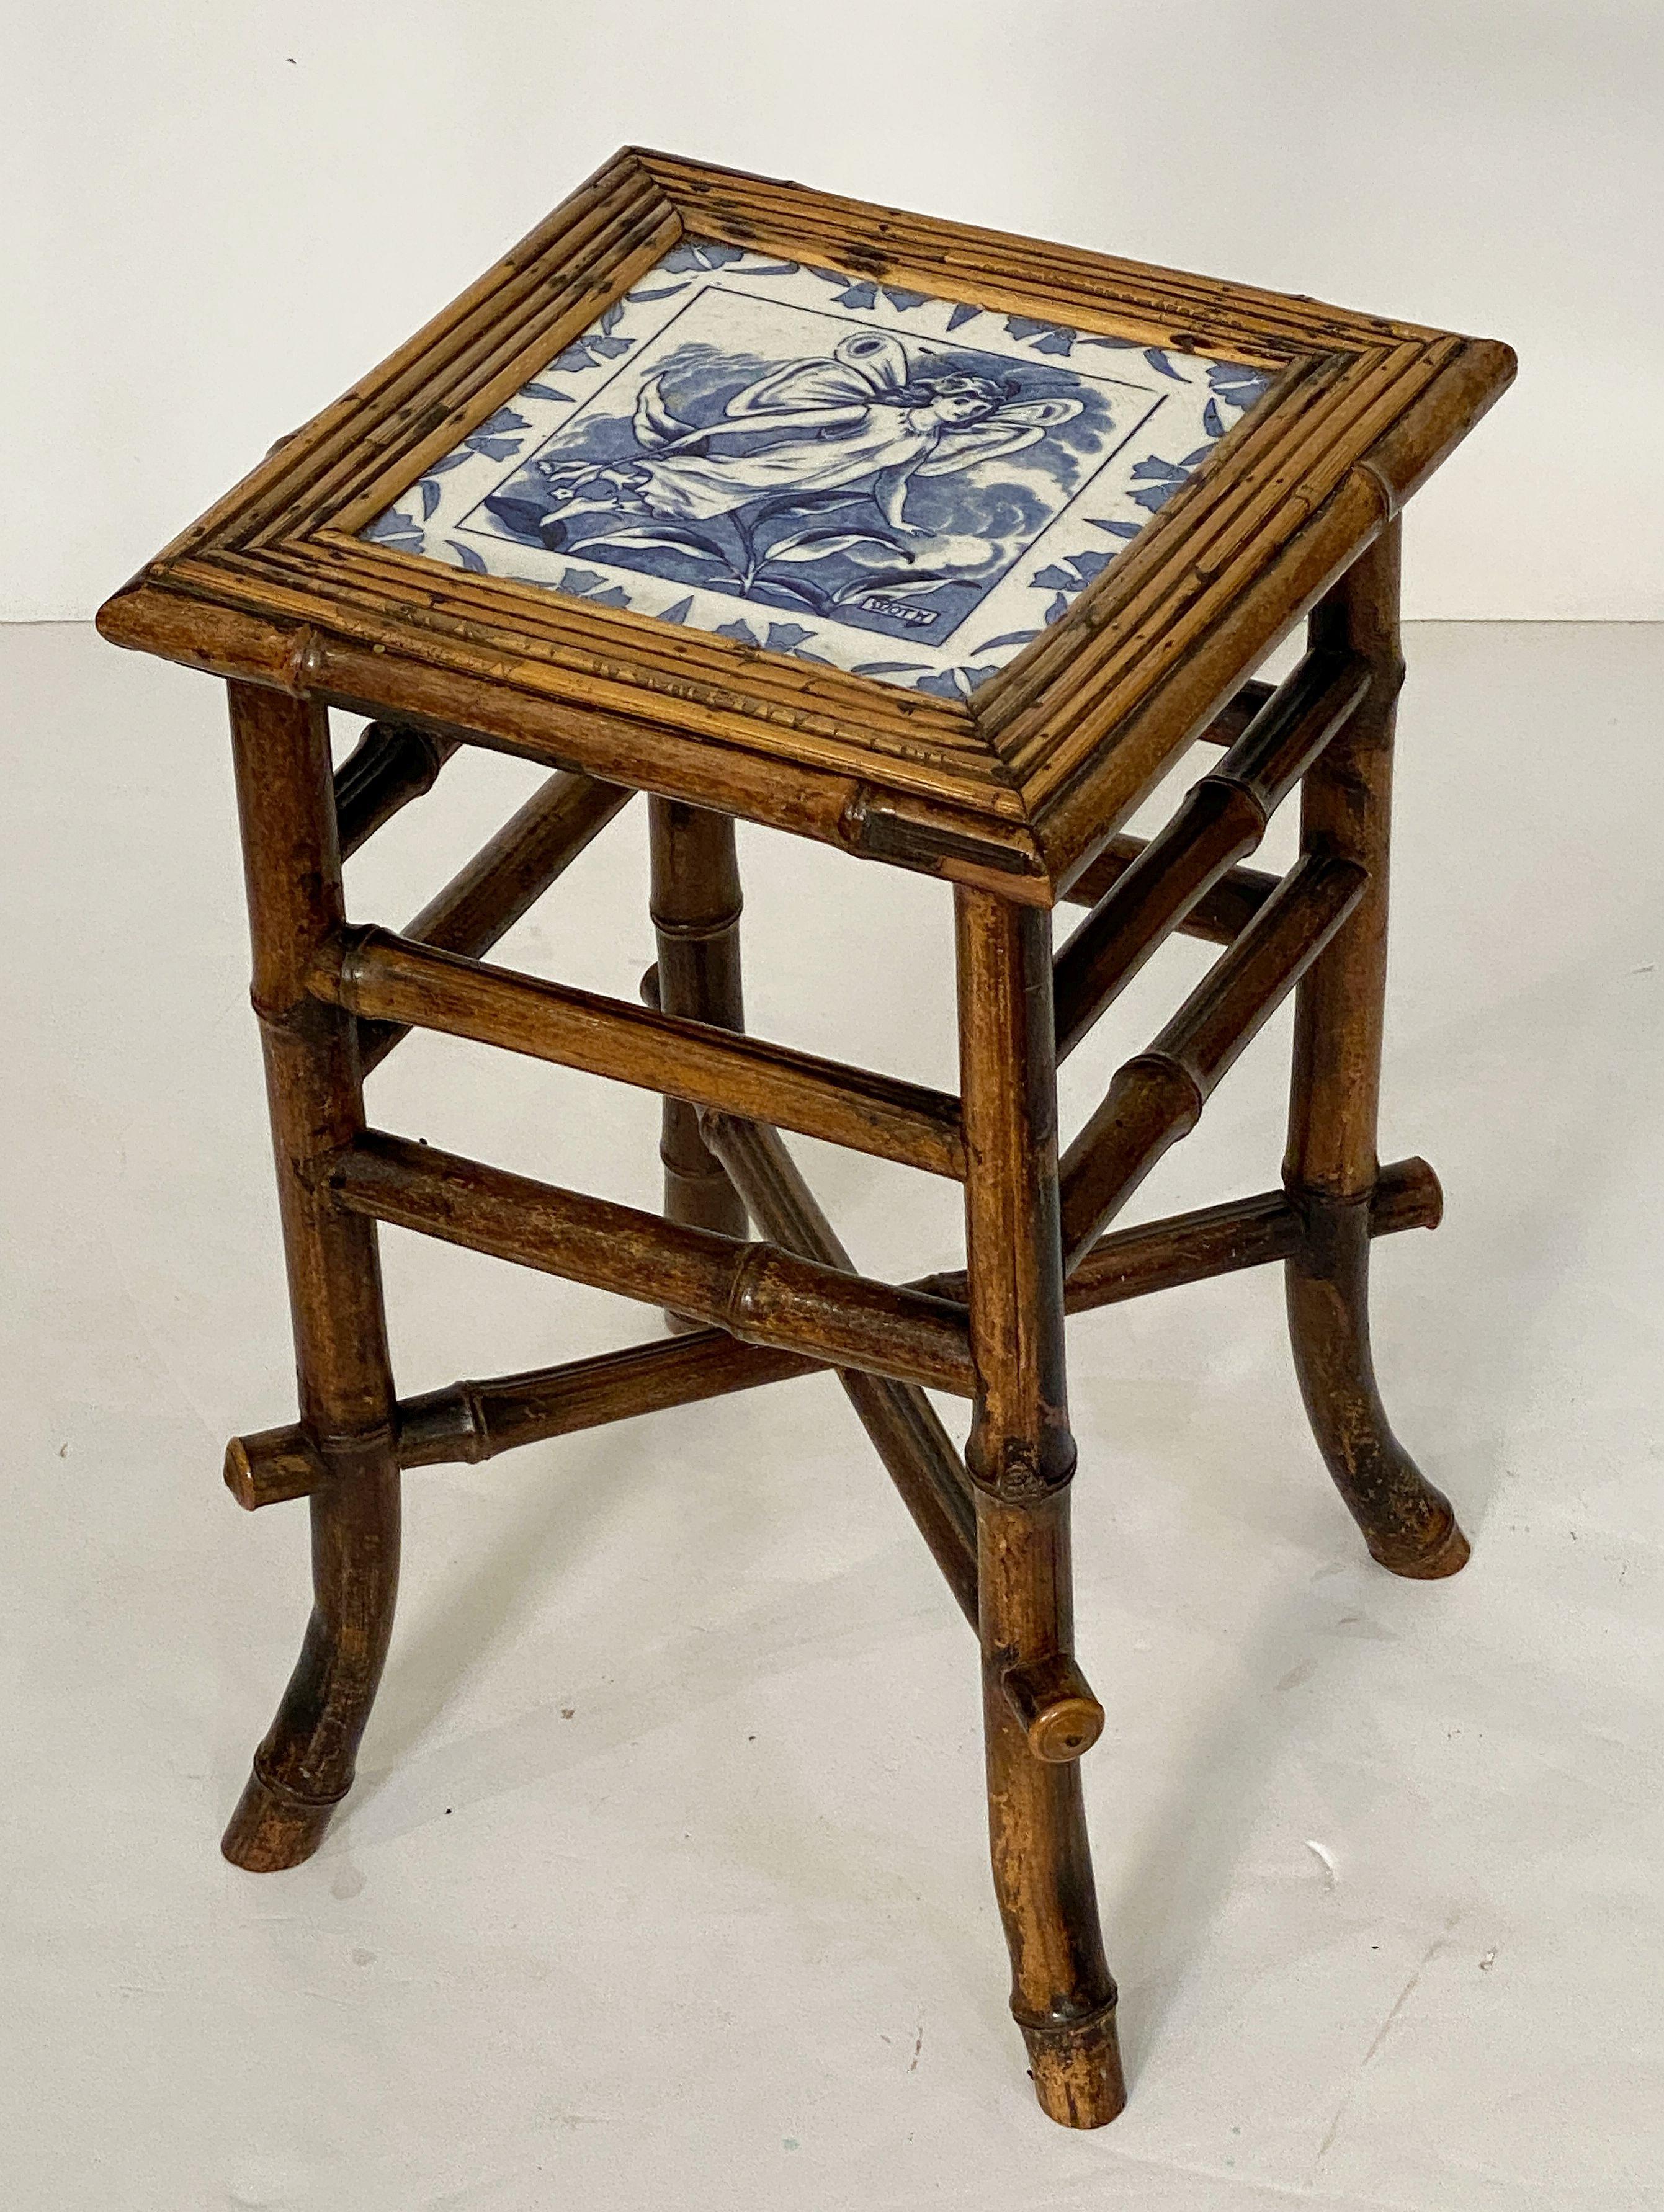 Patinated English Bamboo Table or Stool with Tile Seat from the Aesthetic Movement Era For Sale